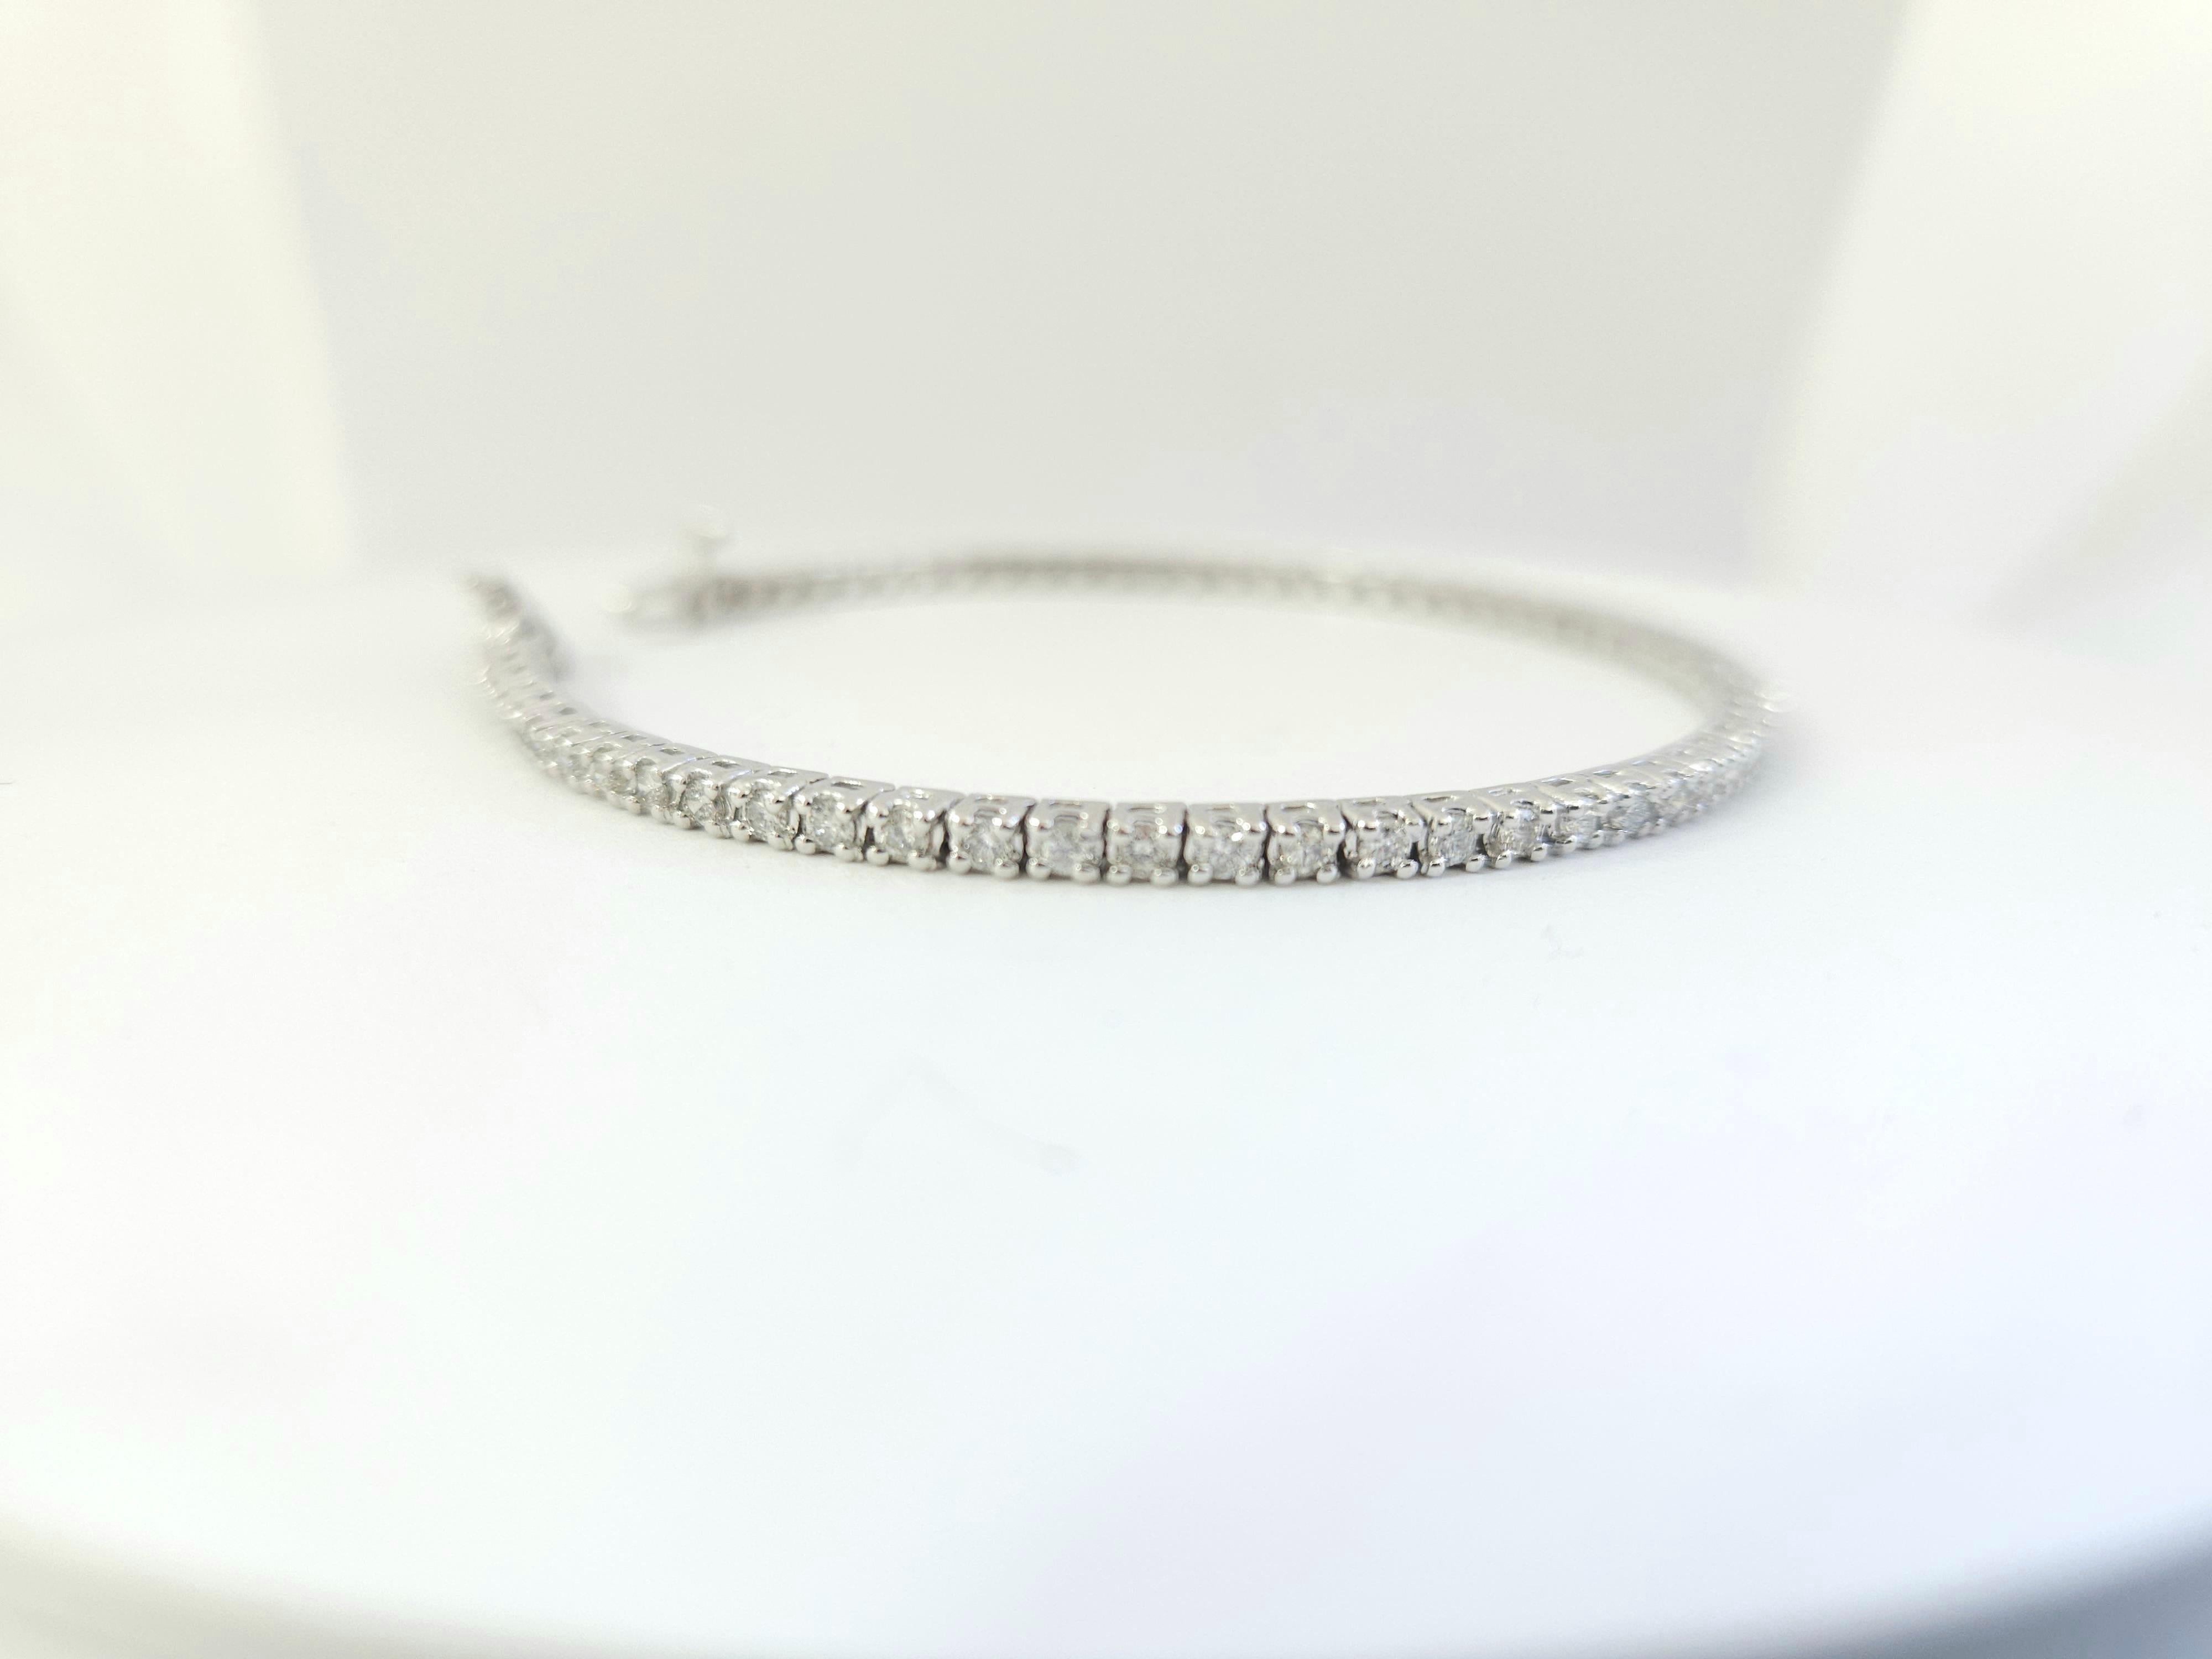 Natural diamonds tennis bracelet round-brilliant cut  14k white gold. 
7 inch. Average Color G, Clarity I 2.40 mm wide,66 pcs, 8.24 grams very shiny don't miss.

*Free shipping within U.S*

